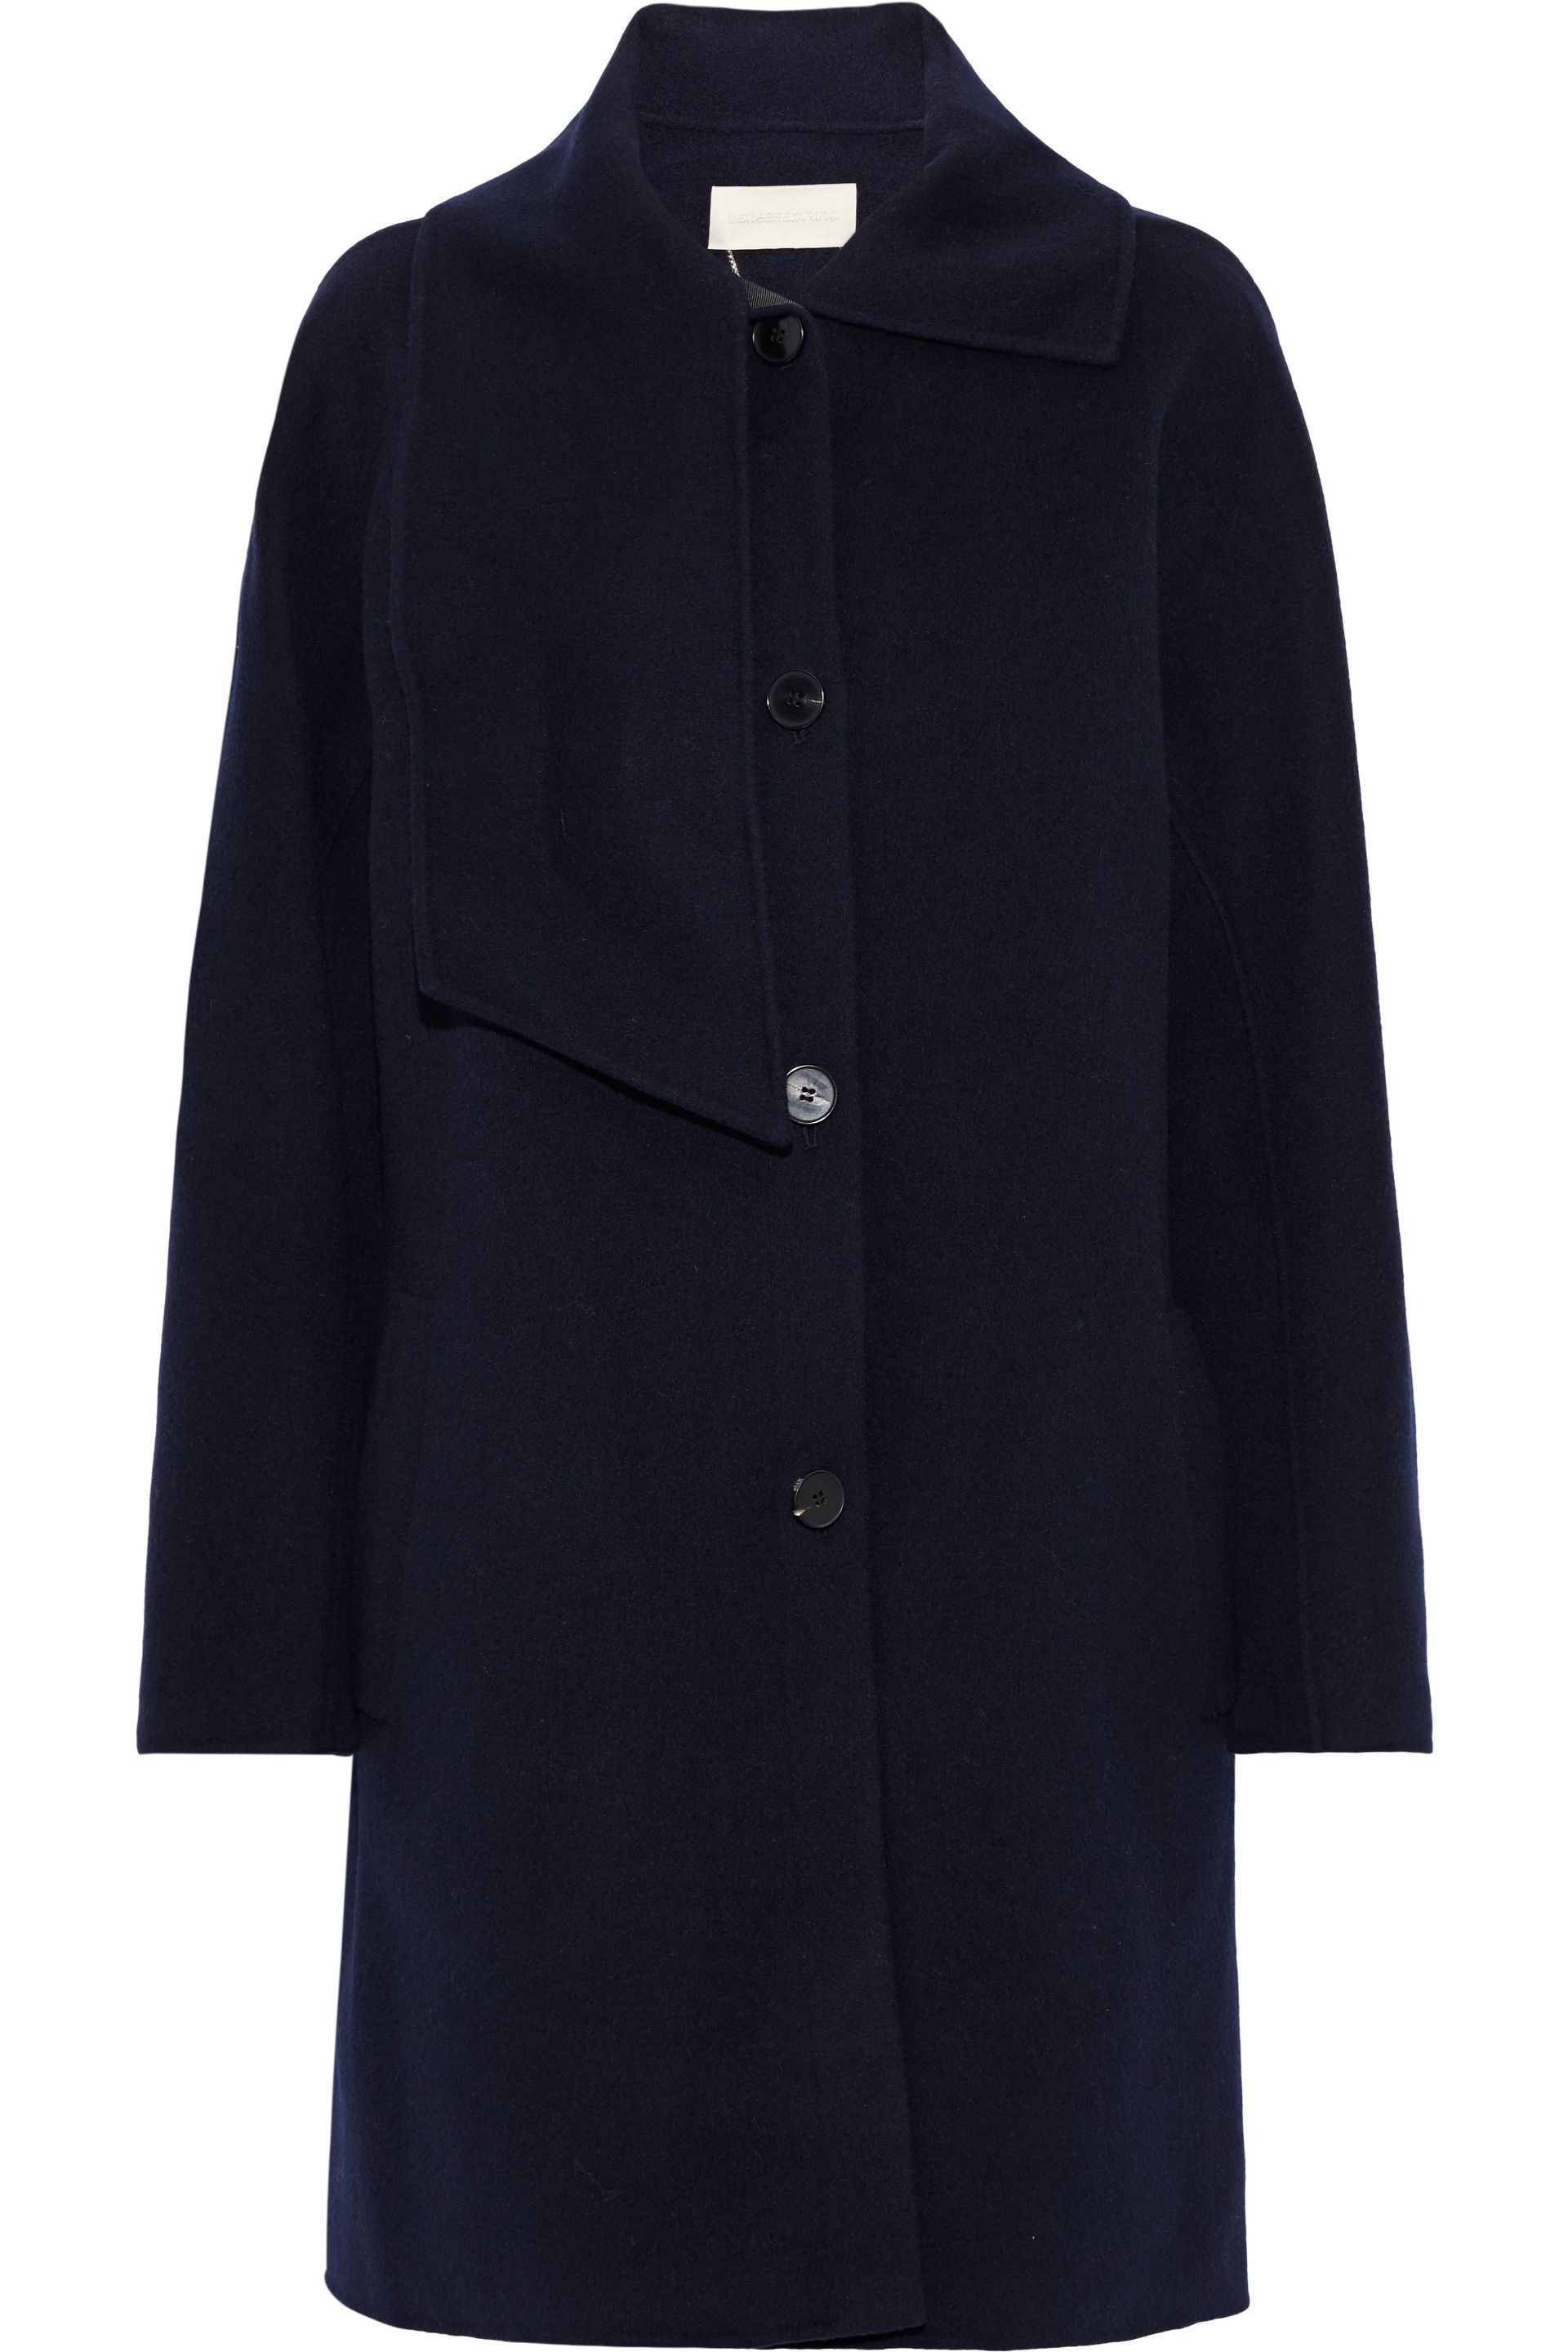 Women's Long Designer Coats | Sale Up To 70% Off At THE OUTNET